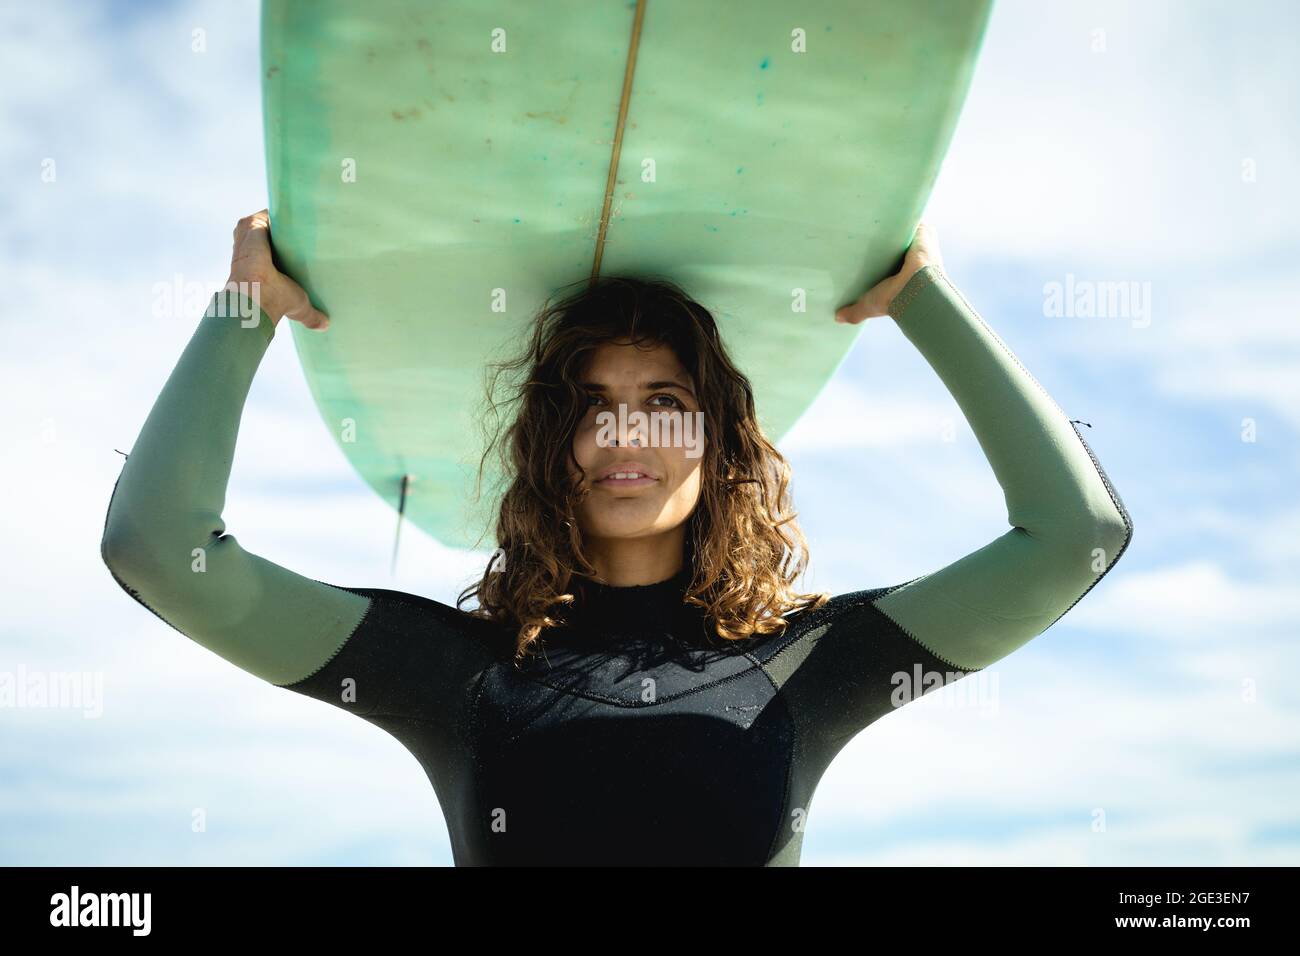 Mixed race woman holding surfboard on sunny day at beach Stock Photo